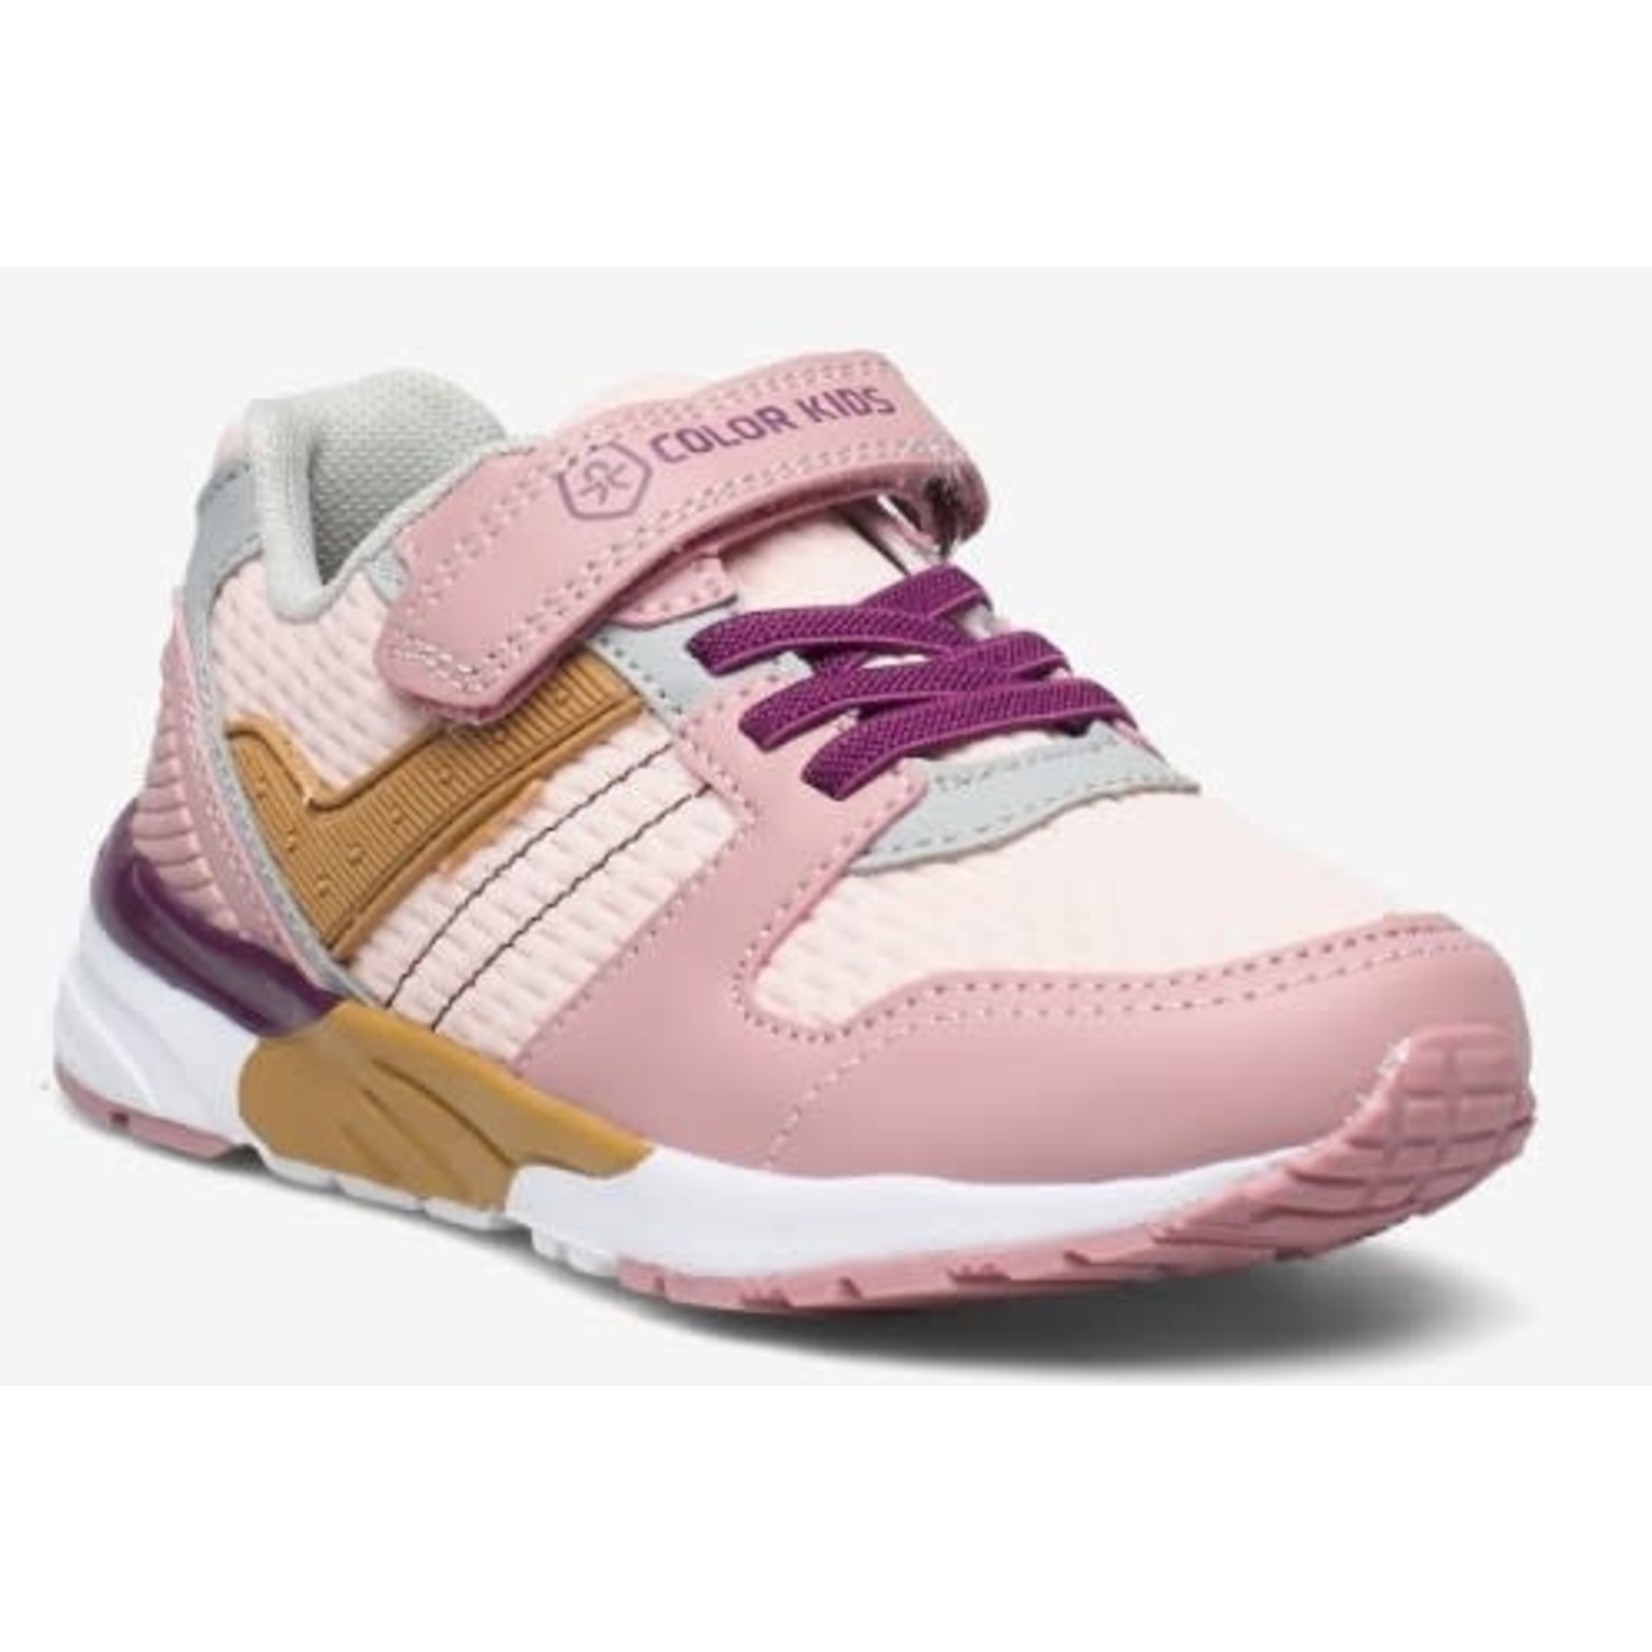 Color Kids COLOR KIDS - Sports shoes pink and purple 'Old Rosa'